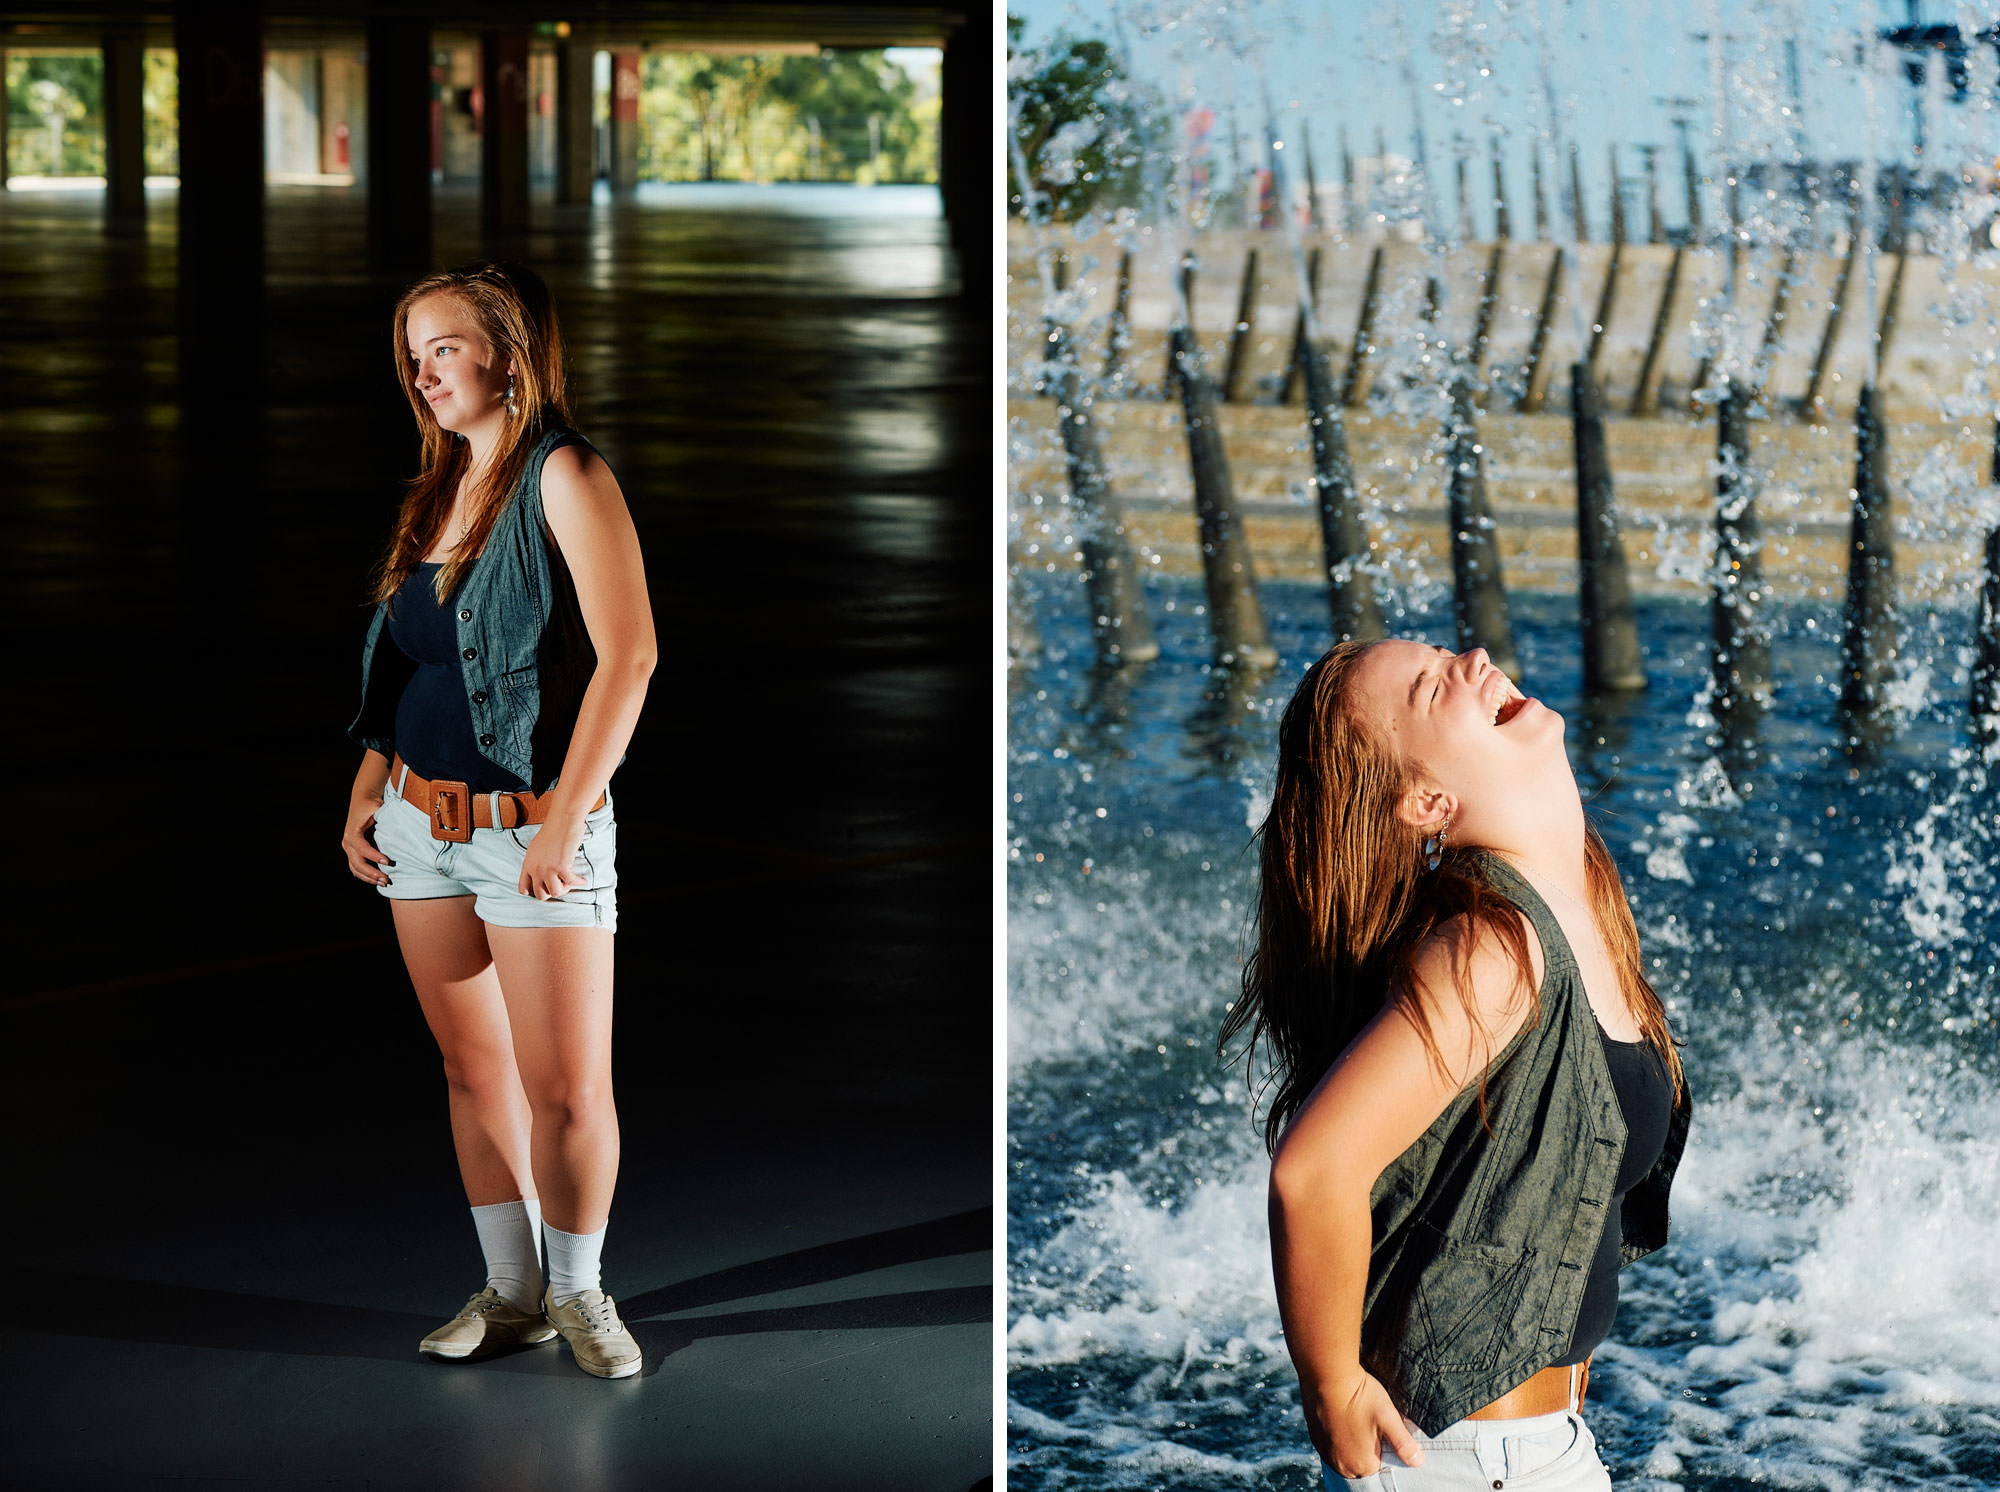 Katie shows some life and attitude during Homebush portrait session